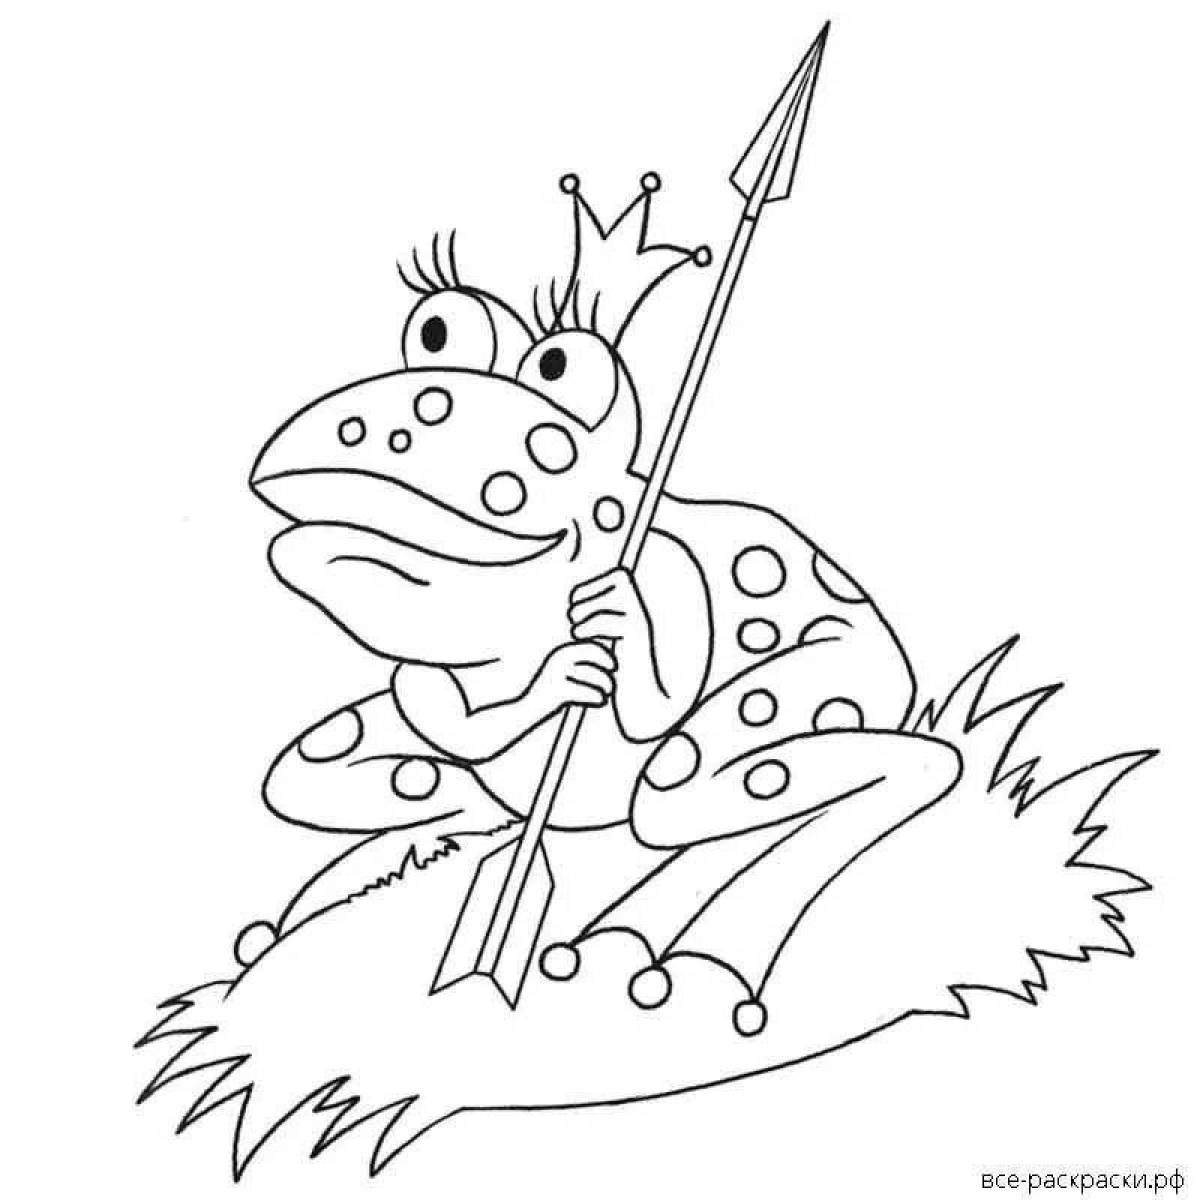 Cute frog princess coloring pages for kids